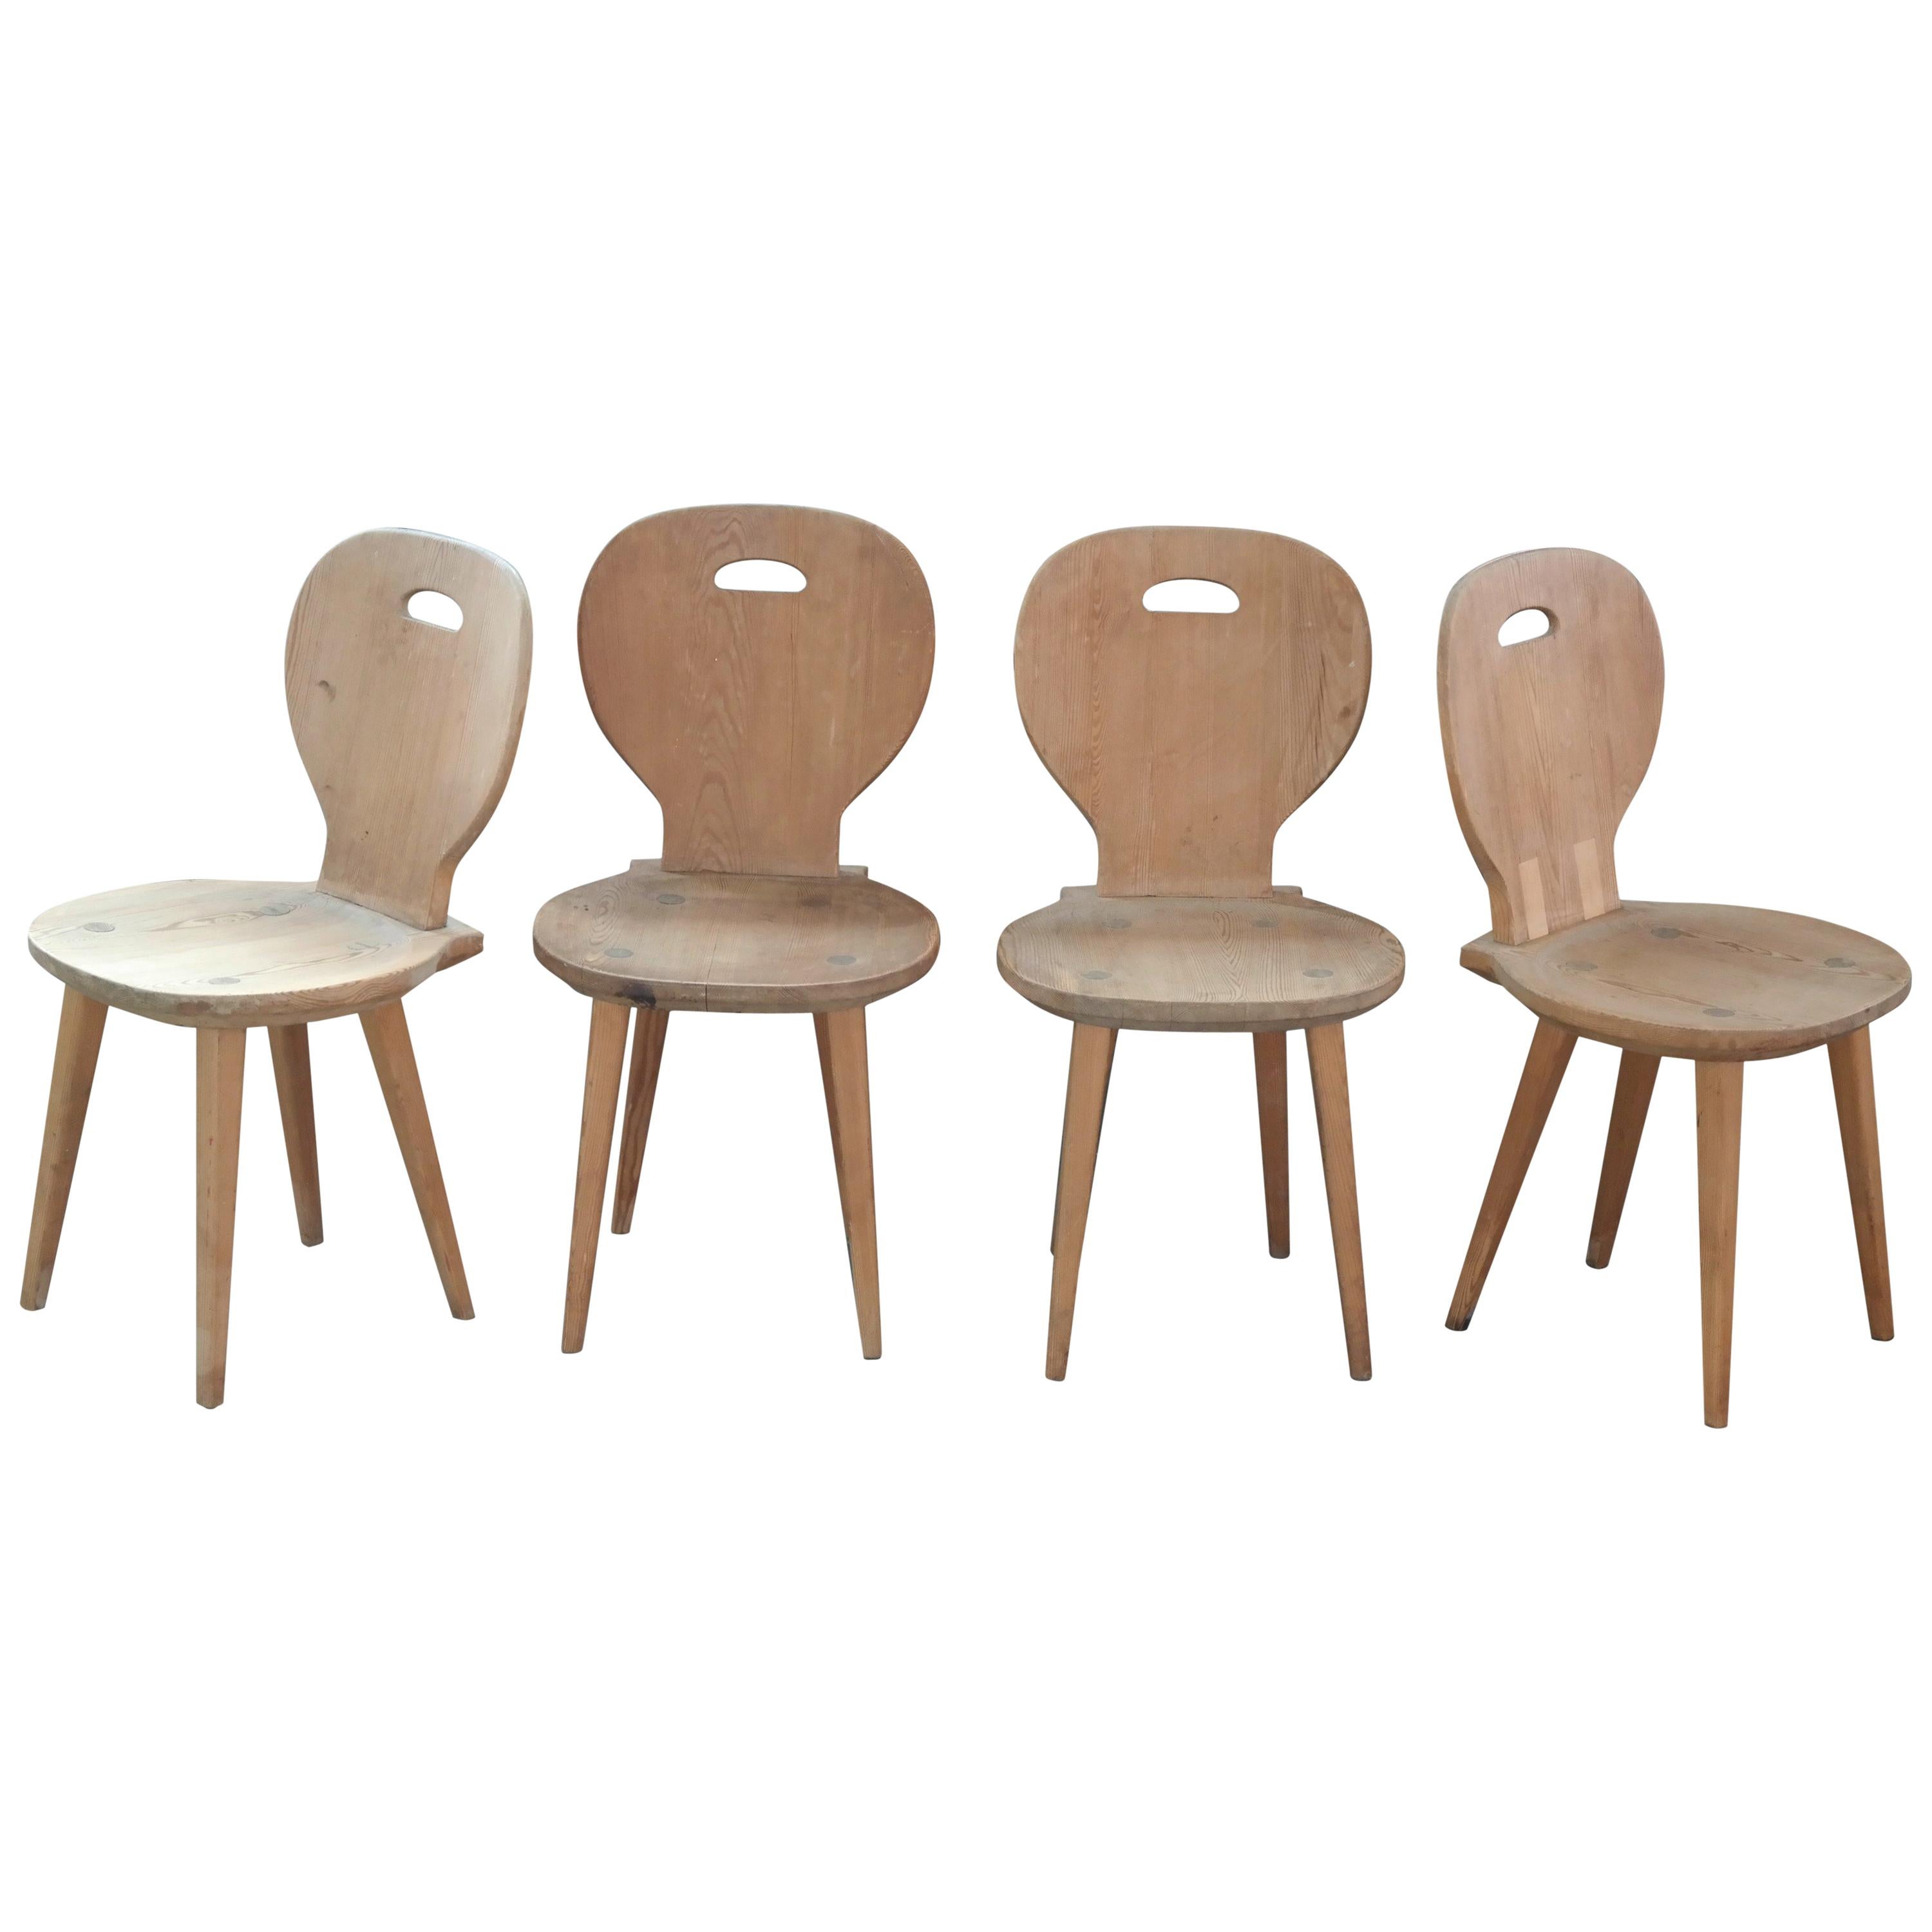 Set of Four Carl Malmsten Dining Chairs in Natural Pine Scandinavian Midcentury